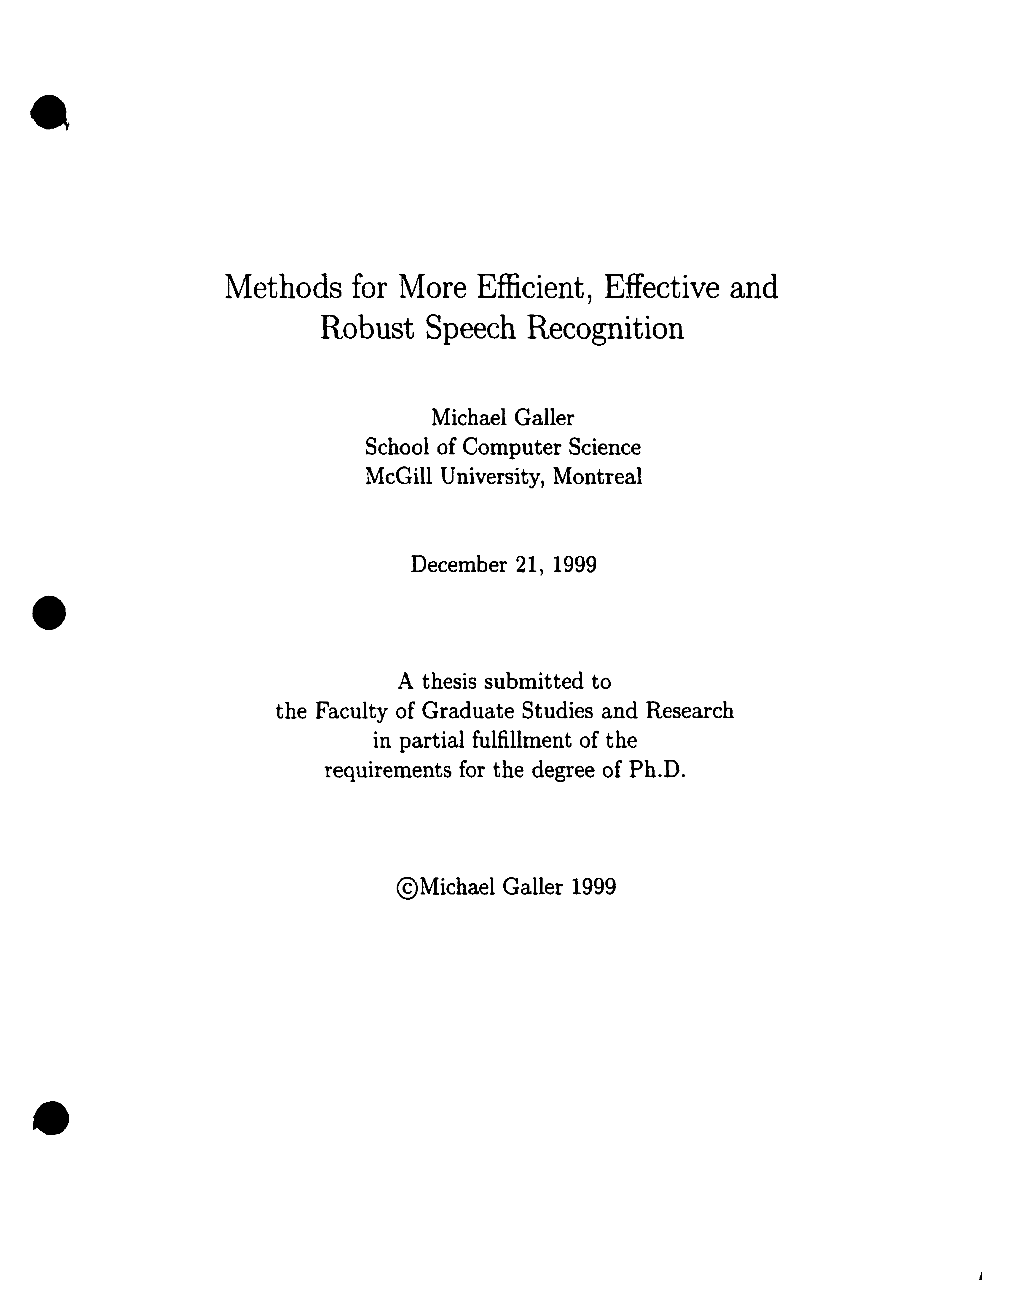 Methods for More Efficient, Effective and Robust Speech Recognition